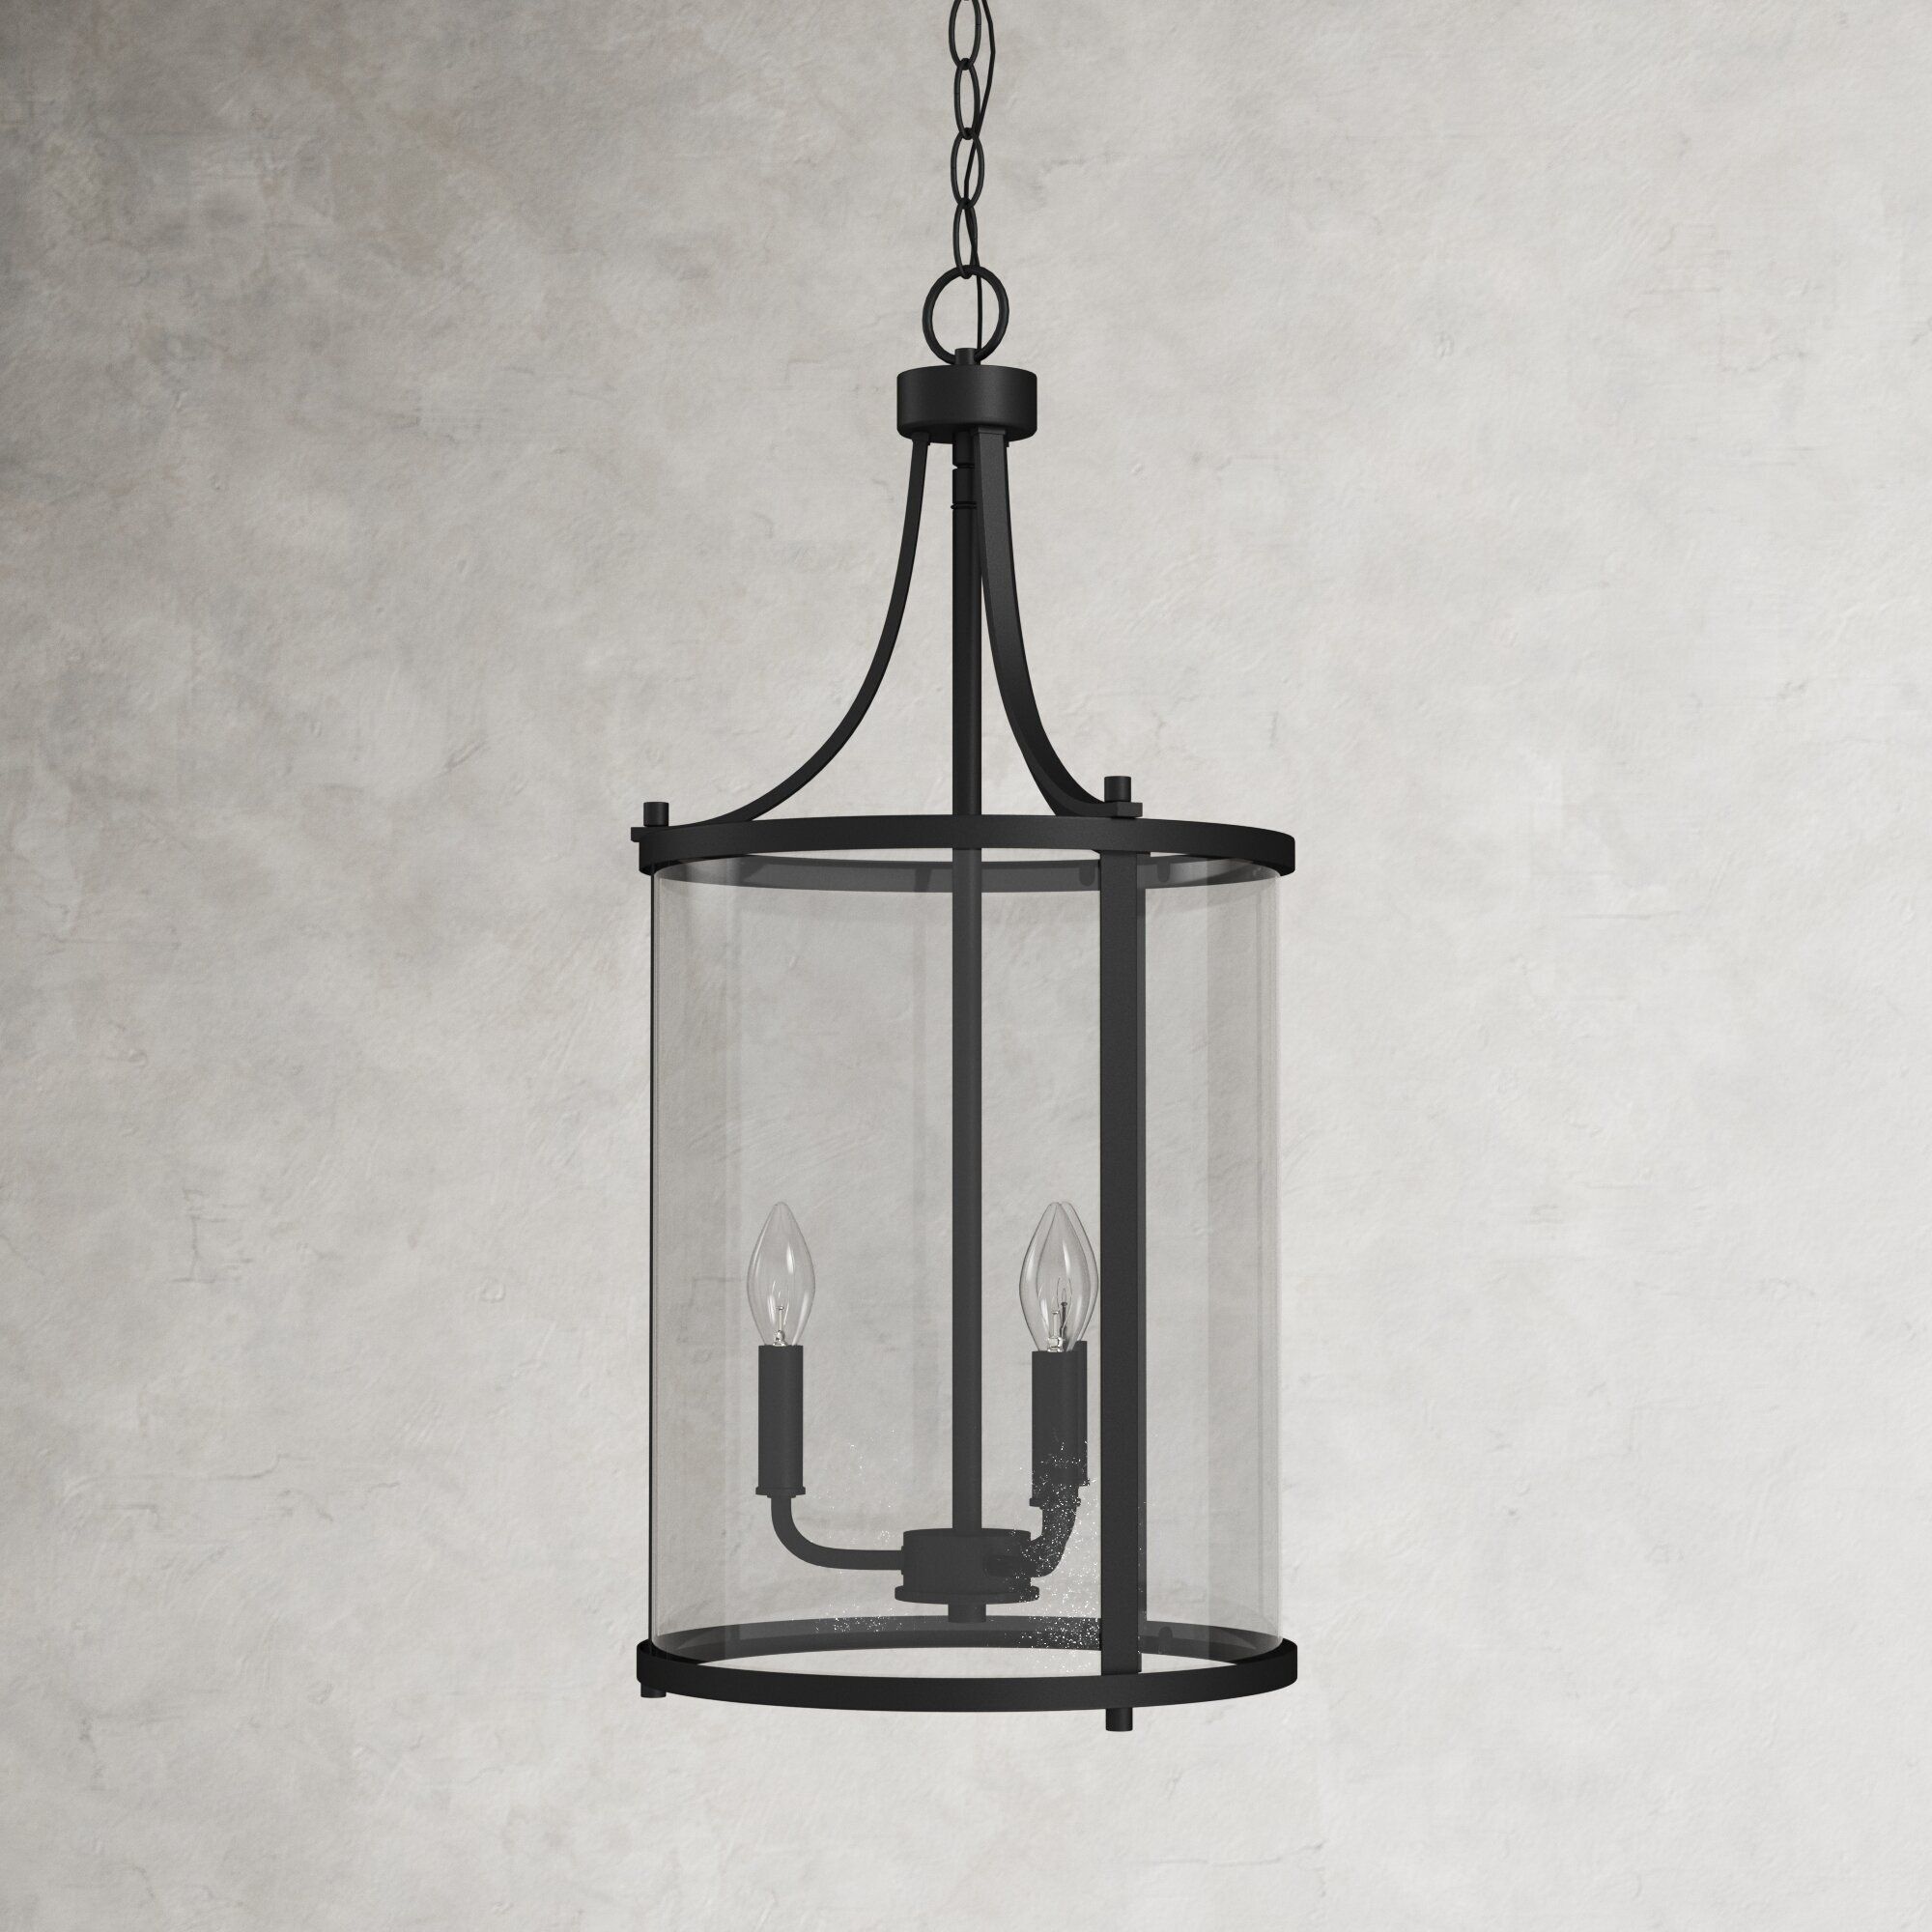 Wayfair | Black Finish Lantern Chandeliers You'll Love In 2022 Intended For Black Iron Lantern Chandeliers (View 9 of 15)